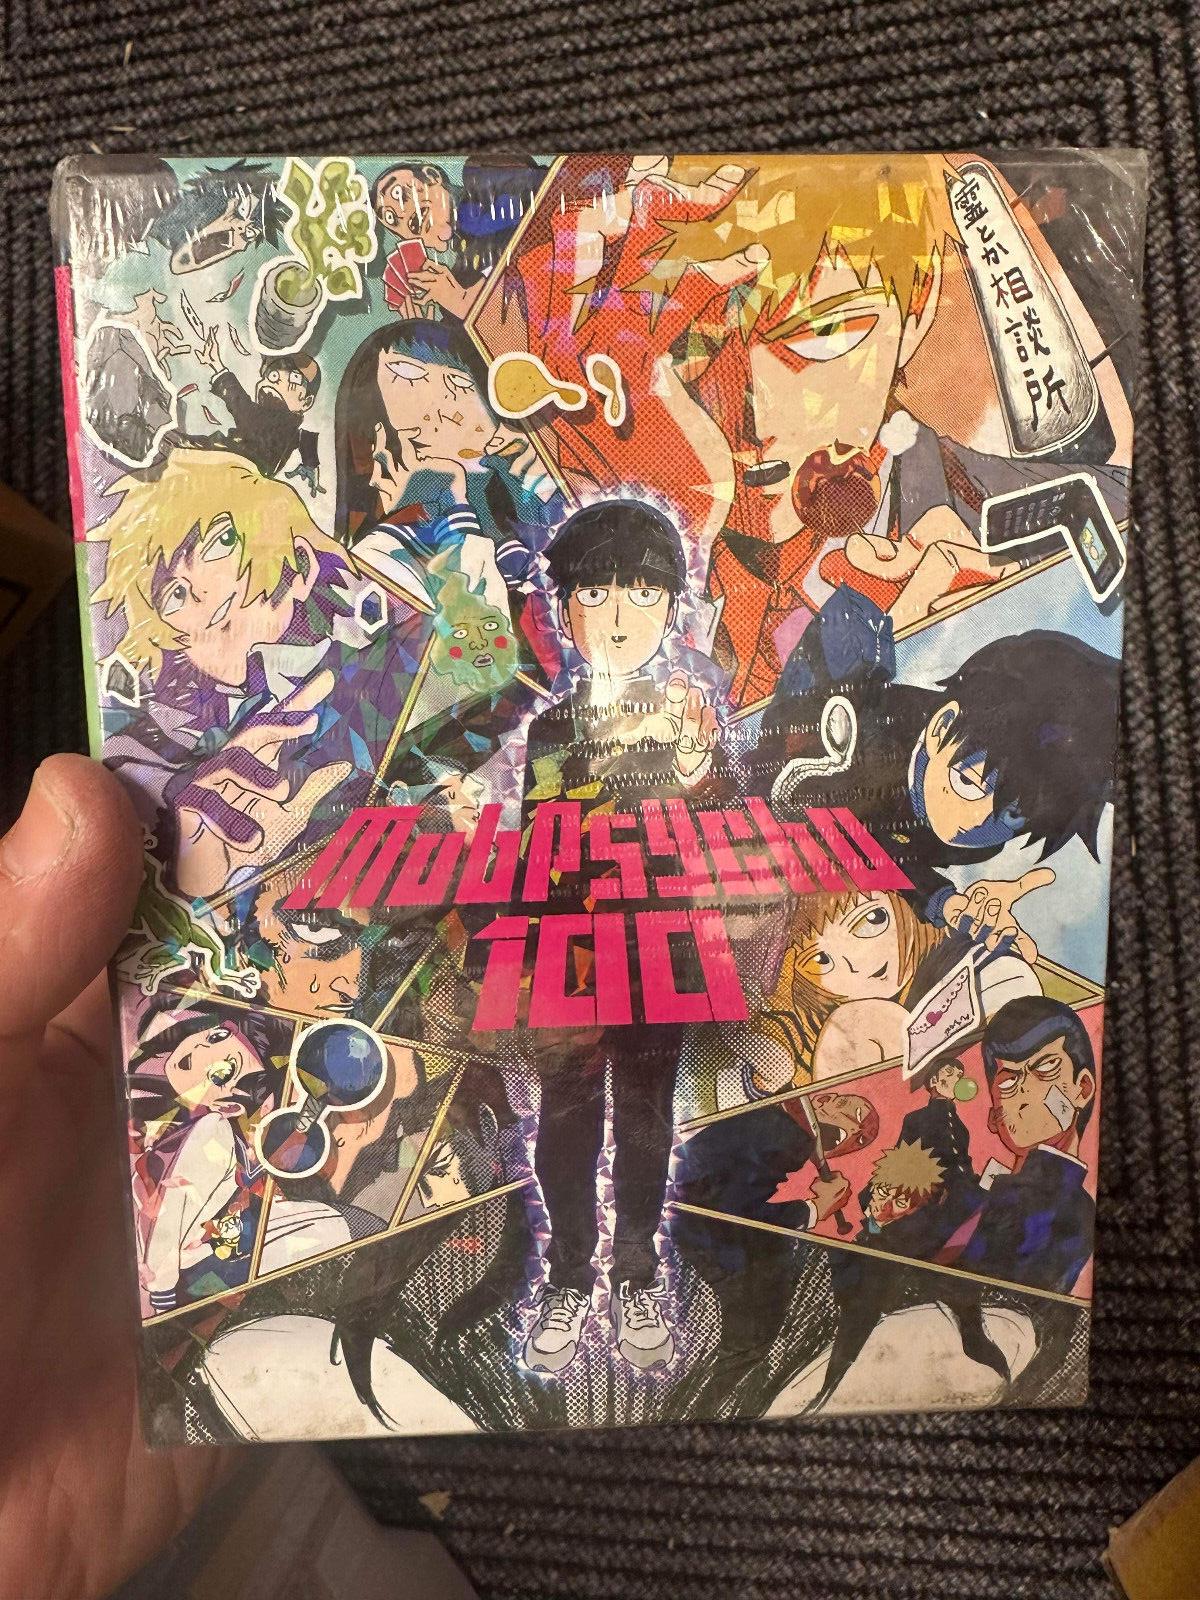 Mob Psycho 100: The Complete Series (Blu-ray/DVD, 2017, 4-Disc Set, Limited...